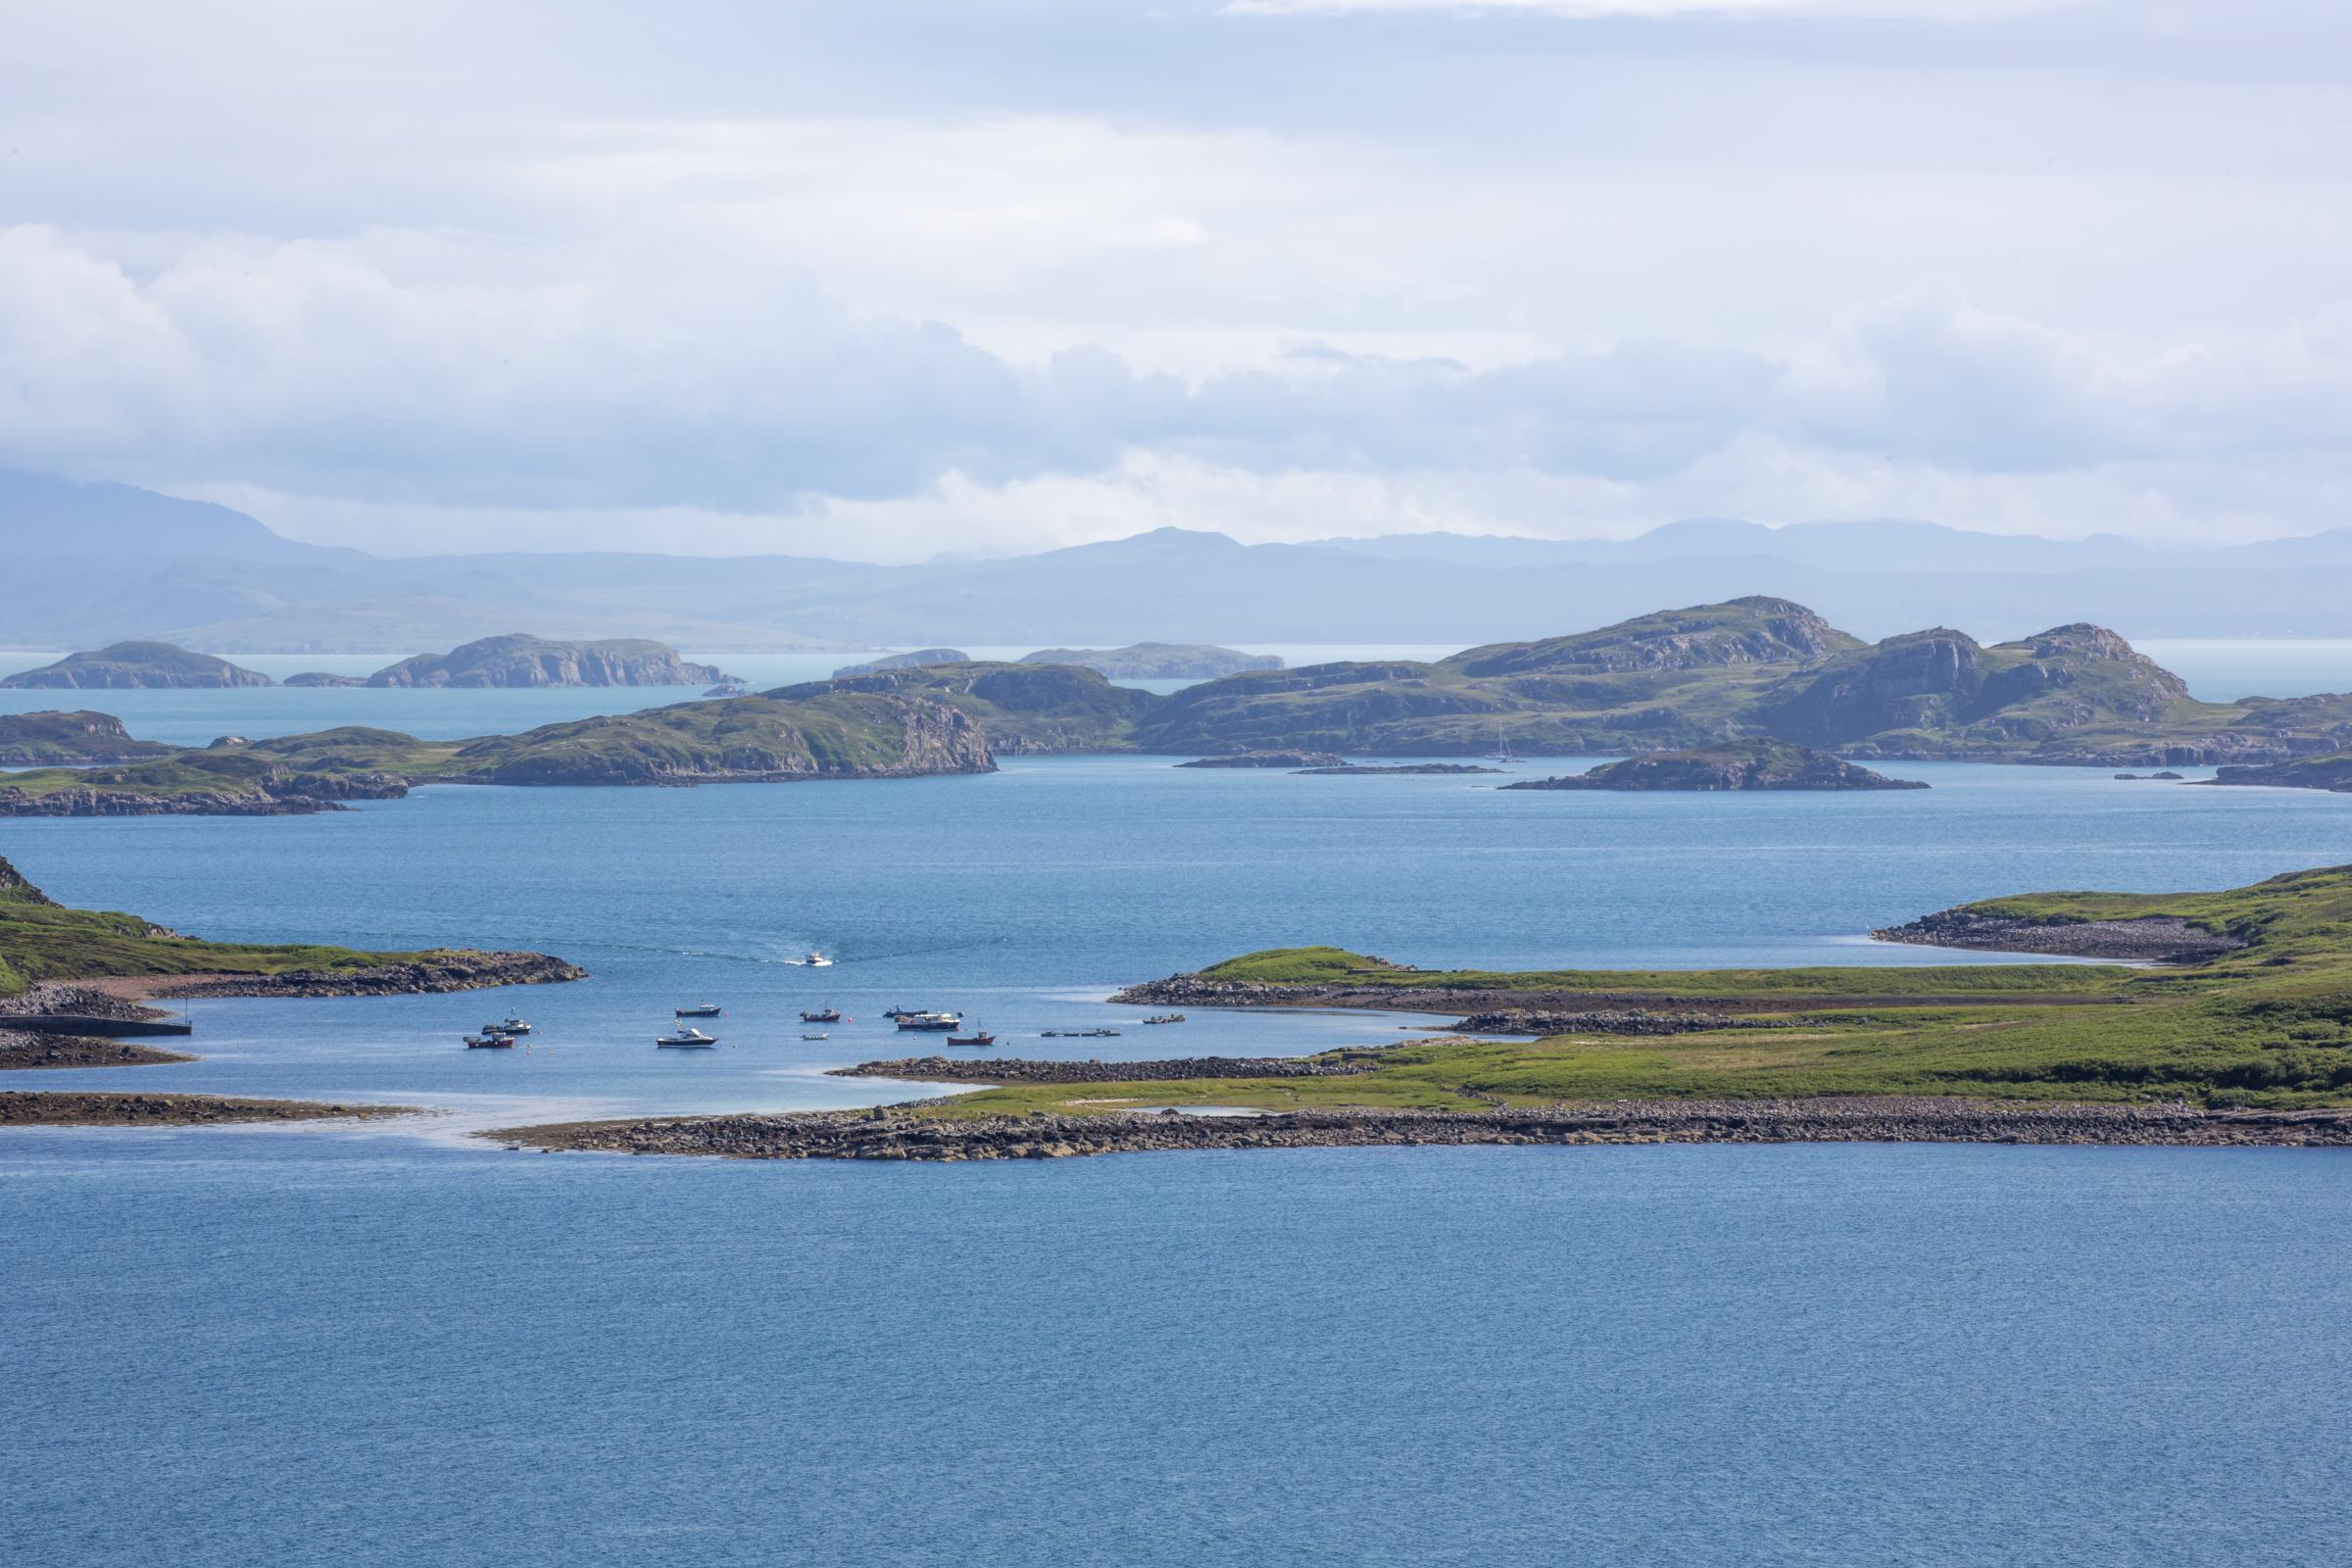 Summer Isles in Assynt, part of the North West Highlands Geopark